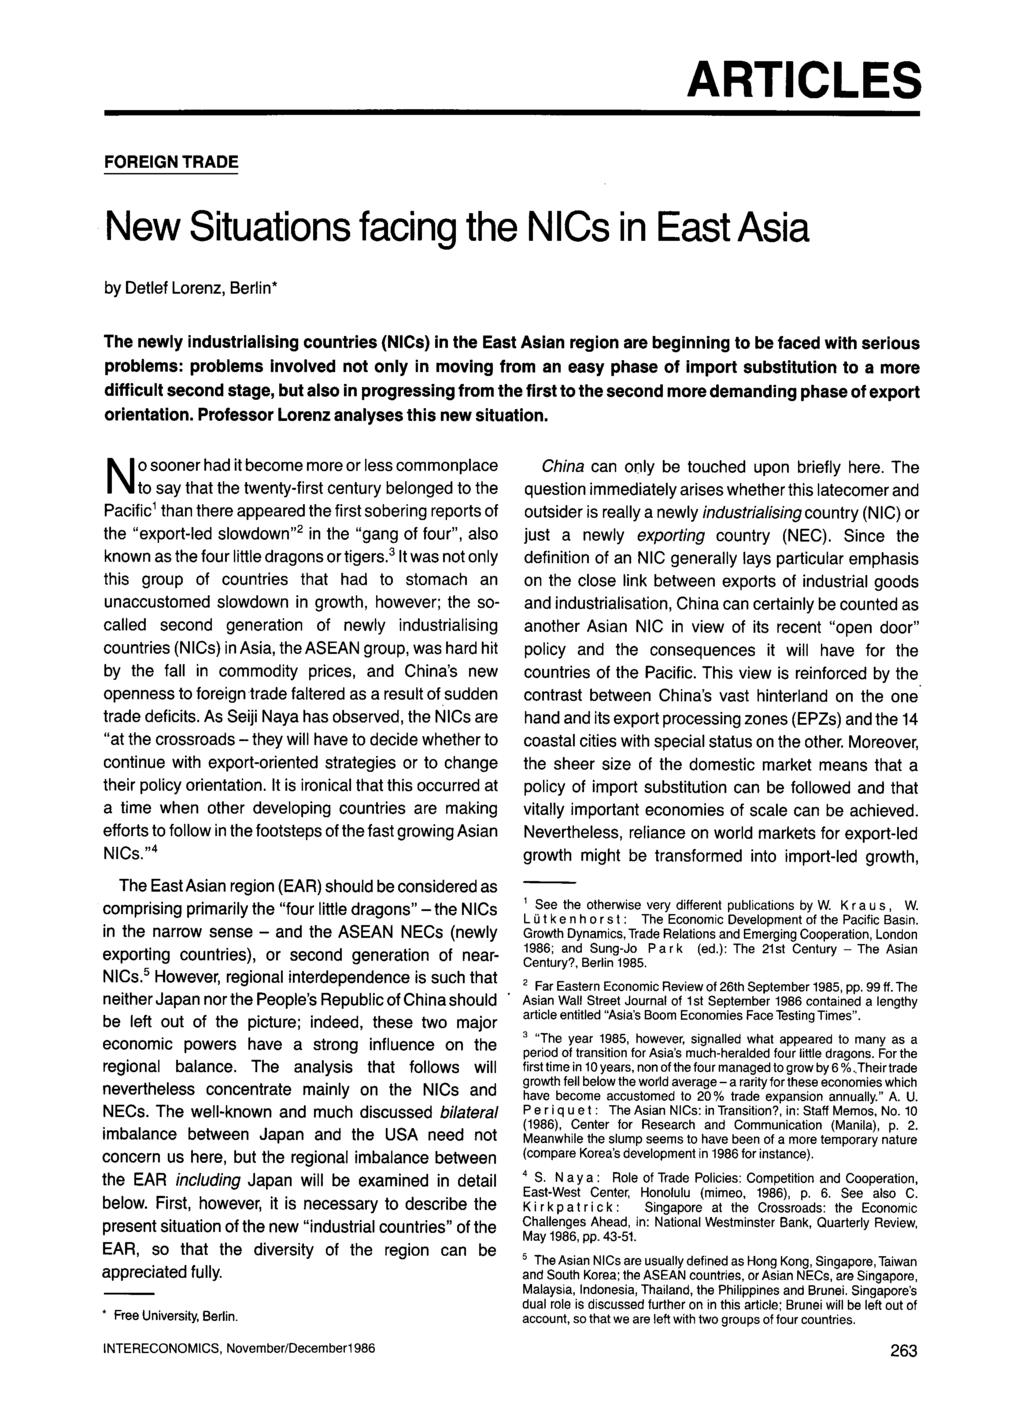 ARTICLES FOREIGN TRADE New Situations facing the NICs in East Asia by Detlef Lorenz, Berlin* The newly industrialising countries (NlCs) in the East Asian region are beginning to be faced with serious